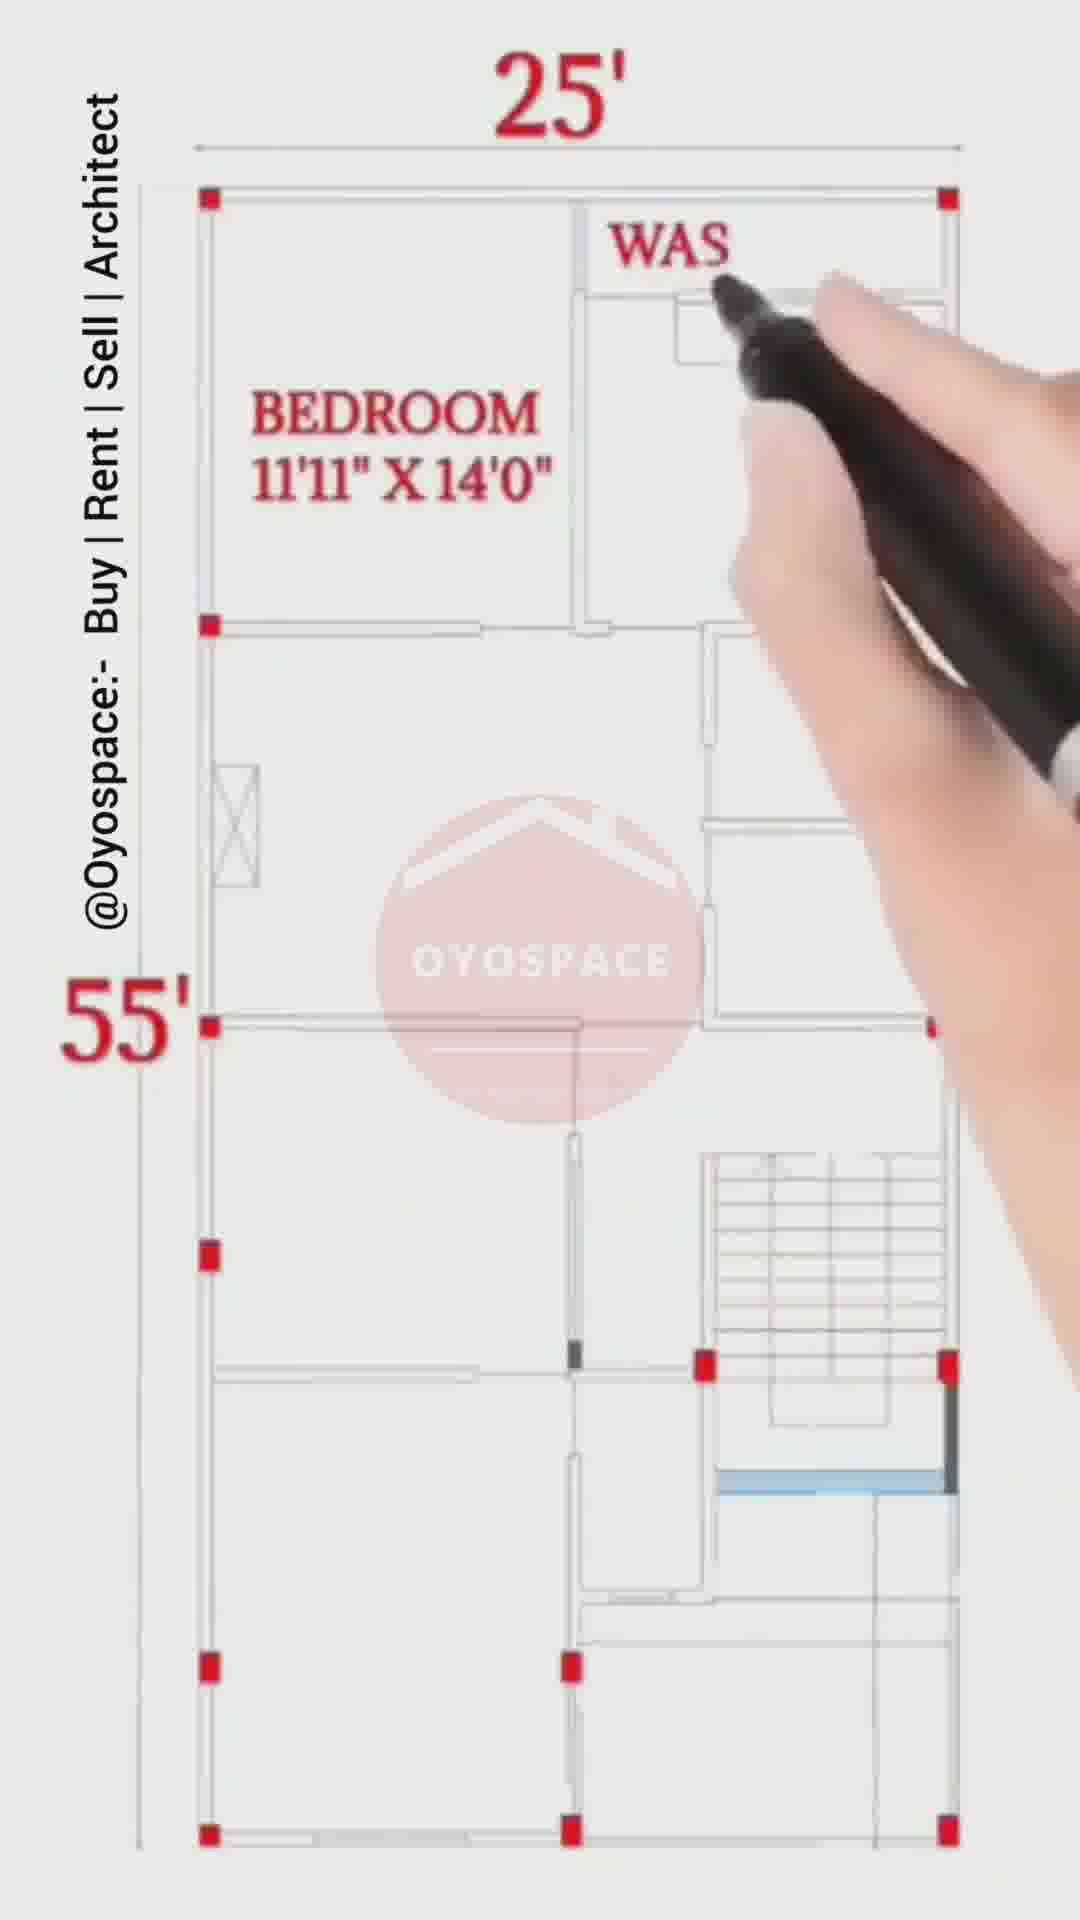 25'×55''Design your Planing @ Only 1 rs / Sq.ft. 
#oyospace #mahendravivrekar 
@oyospace @mahendravivrekar @engineerchaiwale
.
#buy #rent #sell #architect #oyospace
Contact 📲 7024585864 

.
.
#realestate #bhopalproperty #trending #realty #realstateagent #kolopost  #realestateagent #home #property #dreamhome  #interiordesign #luxuryrealestate #newhome #architecture #house #realestateinvesting #luxuryhomes #realestatelife #koloapp  #design #realestateinvestor #koloviral  #sold #broker #homesforsale